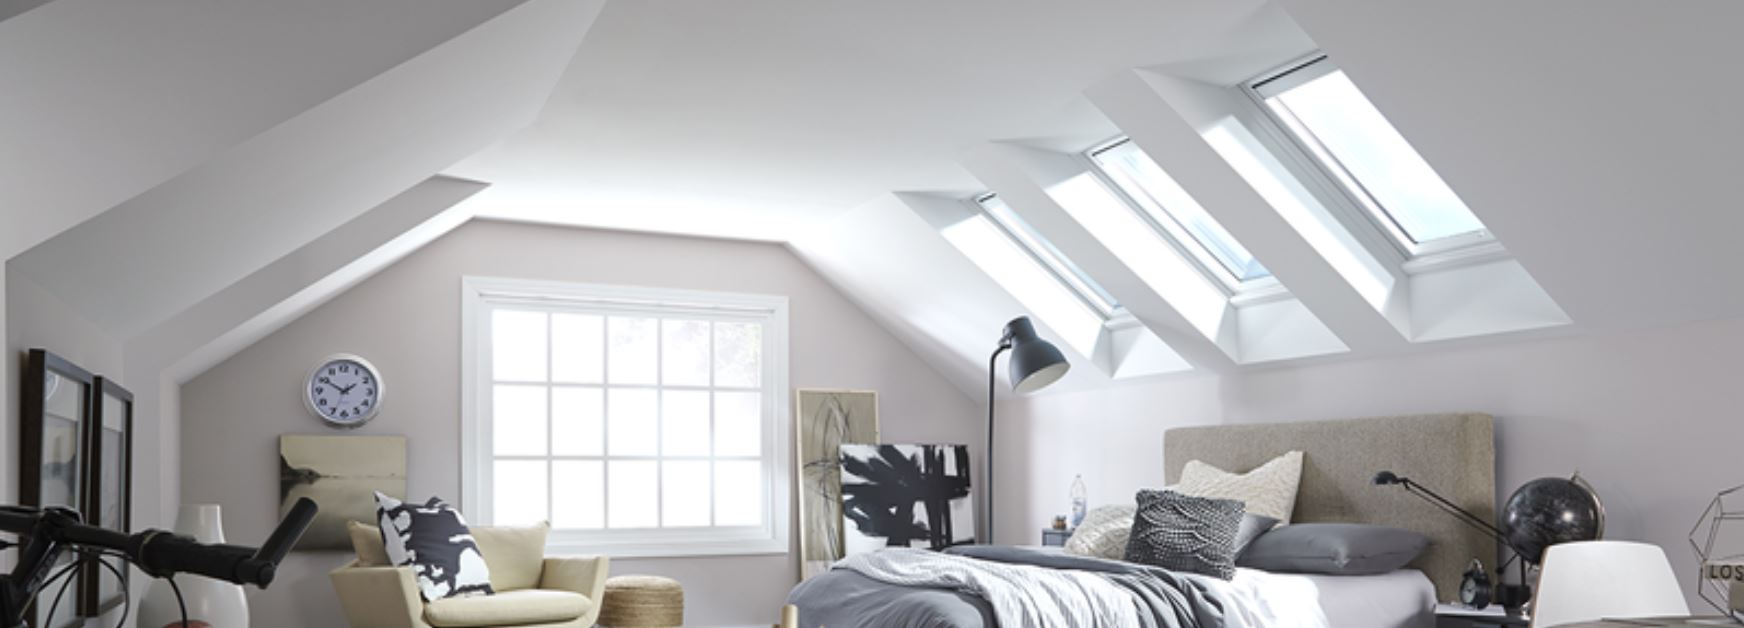 Explore the Latest in Skylights & Roof Windows